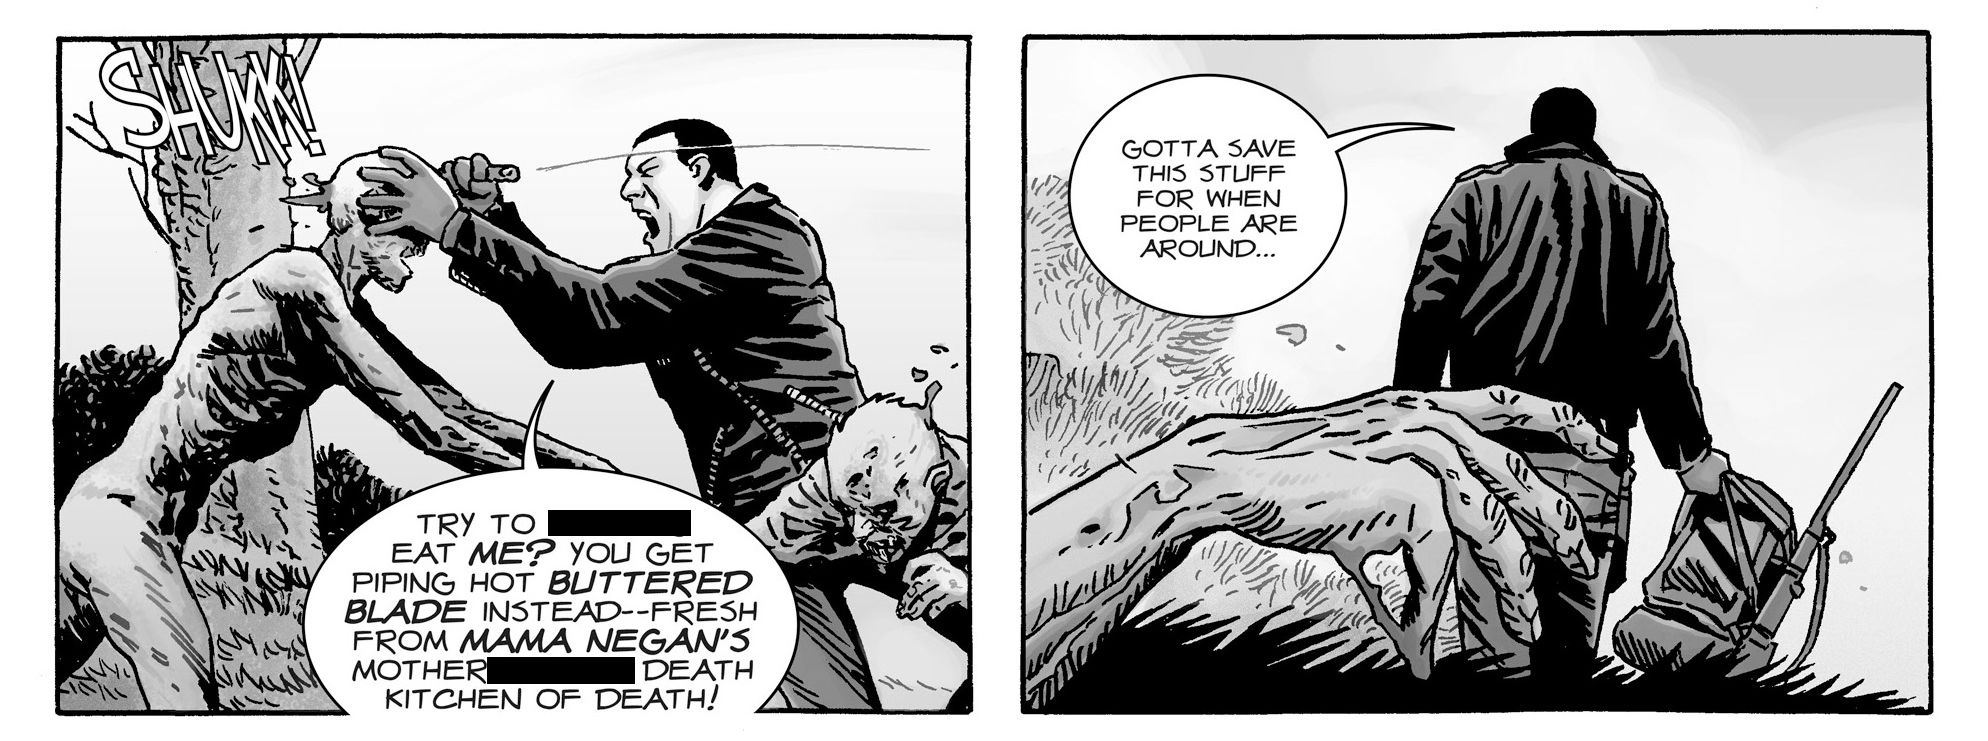 Negan expressing his comedic style The Walking Dead 170-005 smaller panel